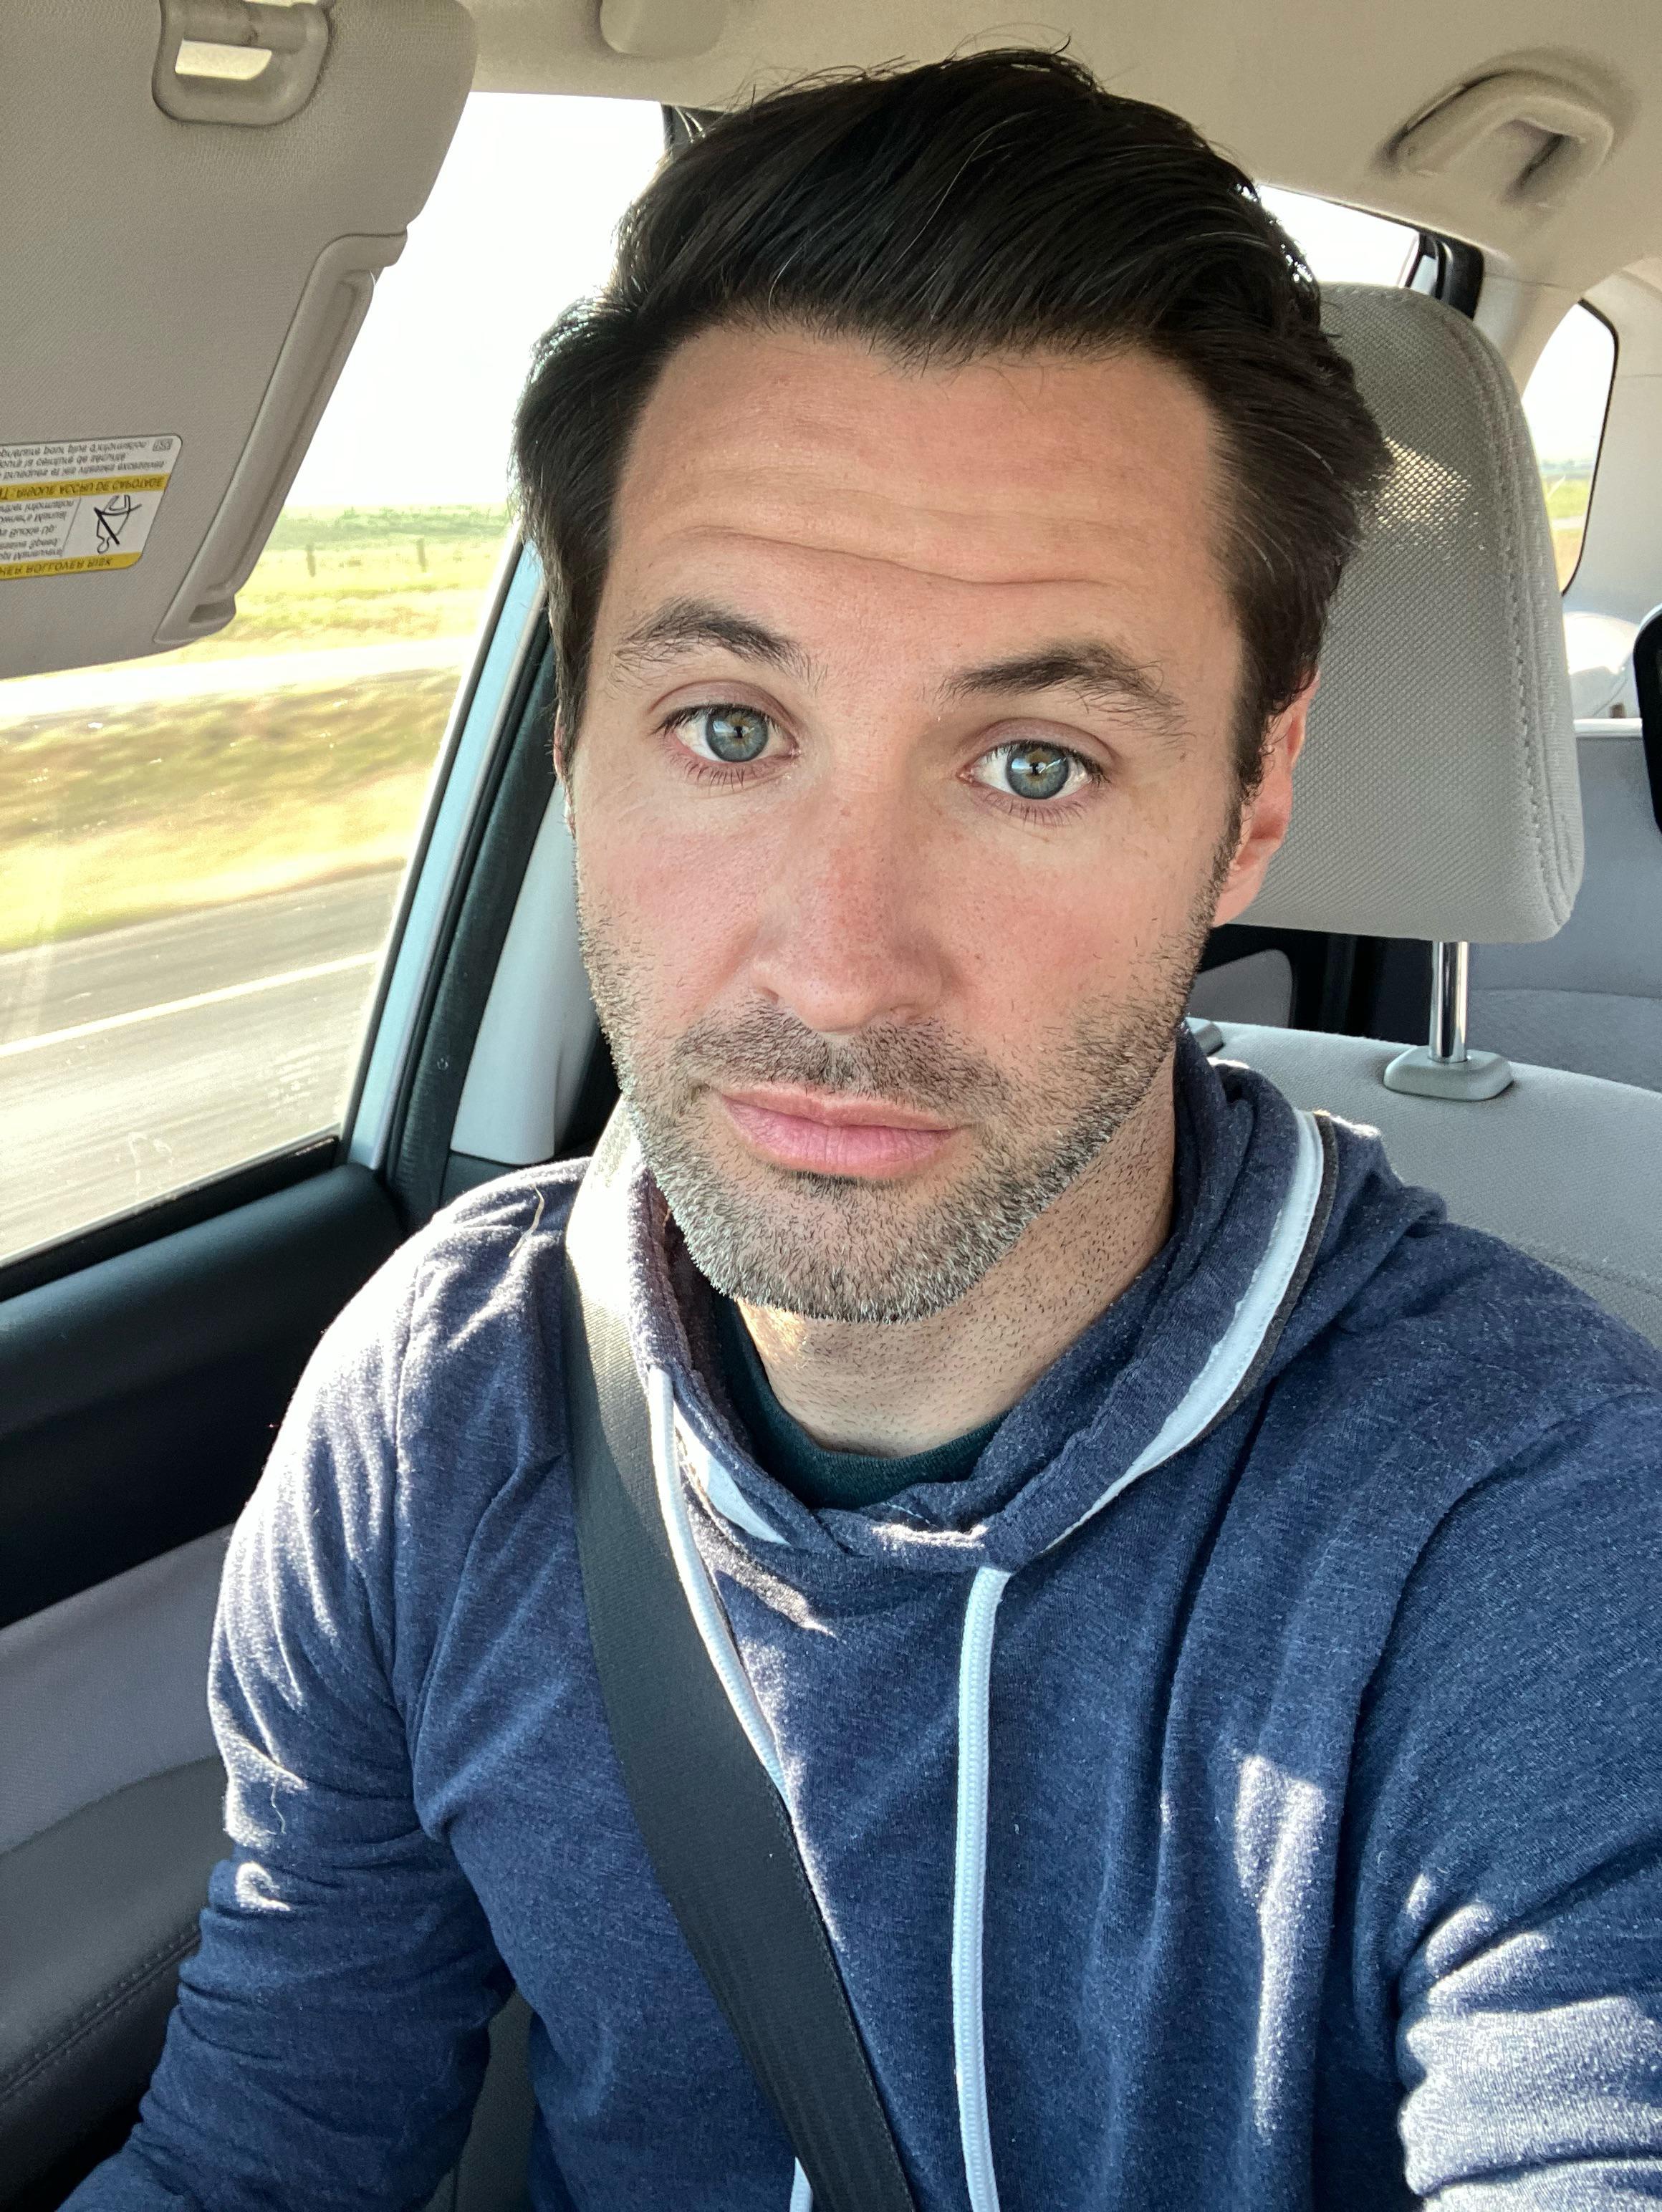 Good morning. [37] year old dad solo on a road trip did the day ...